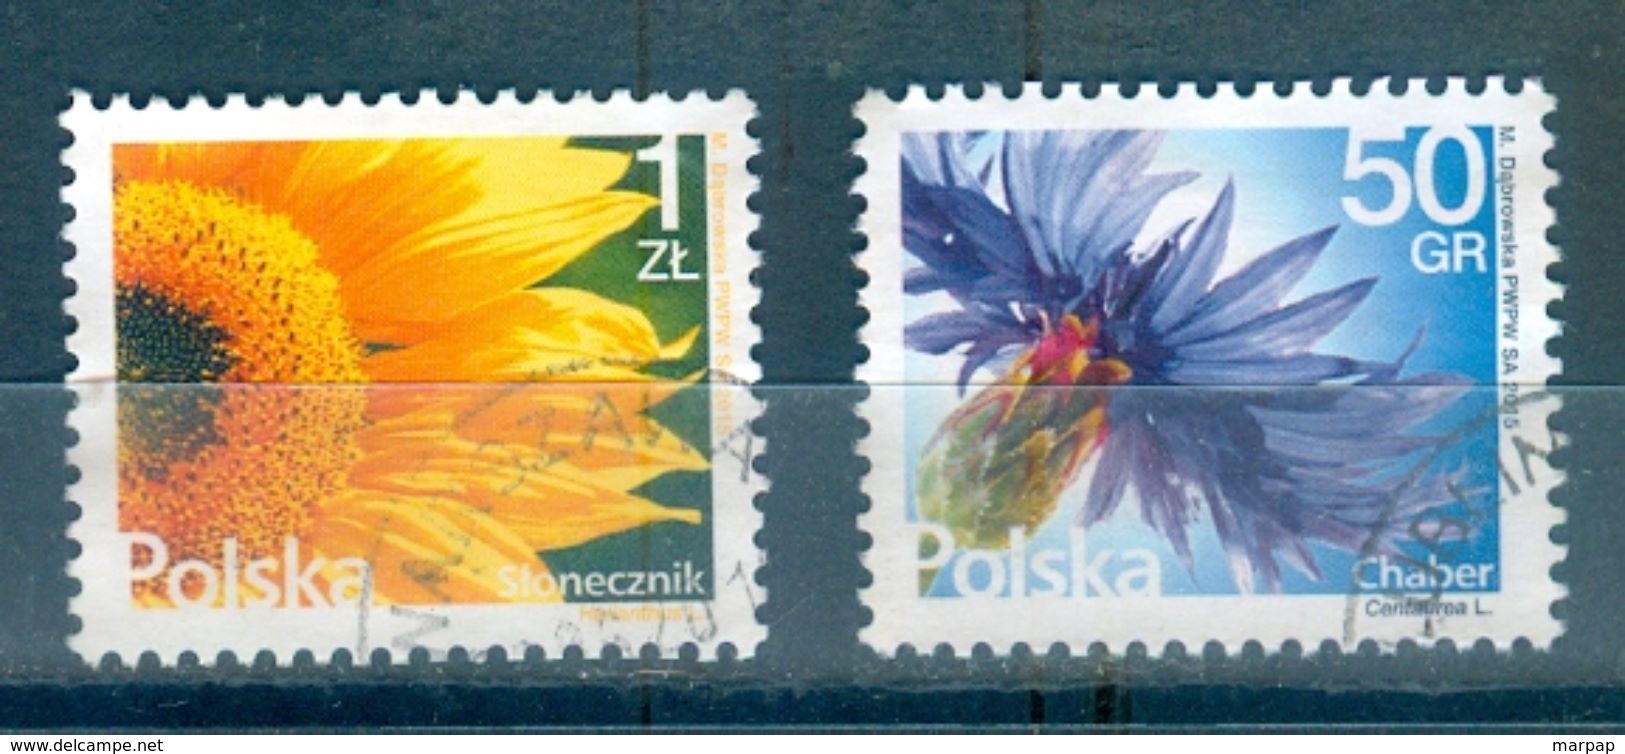 Poland, 2015 Issue - Used Stamps